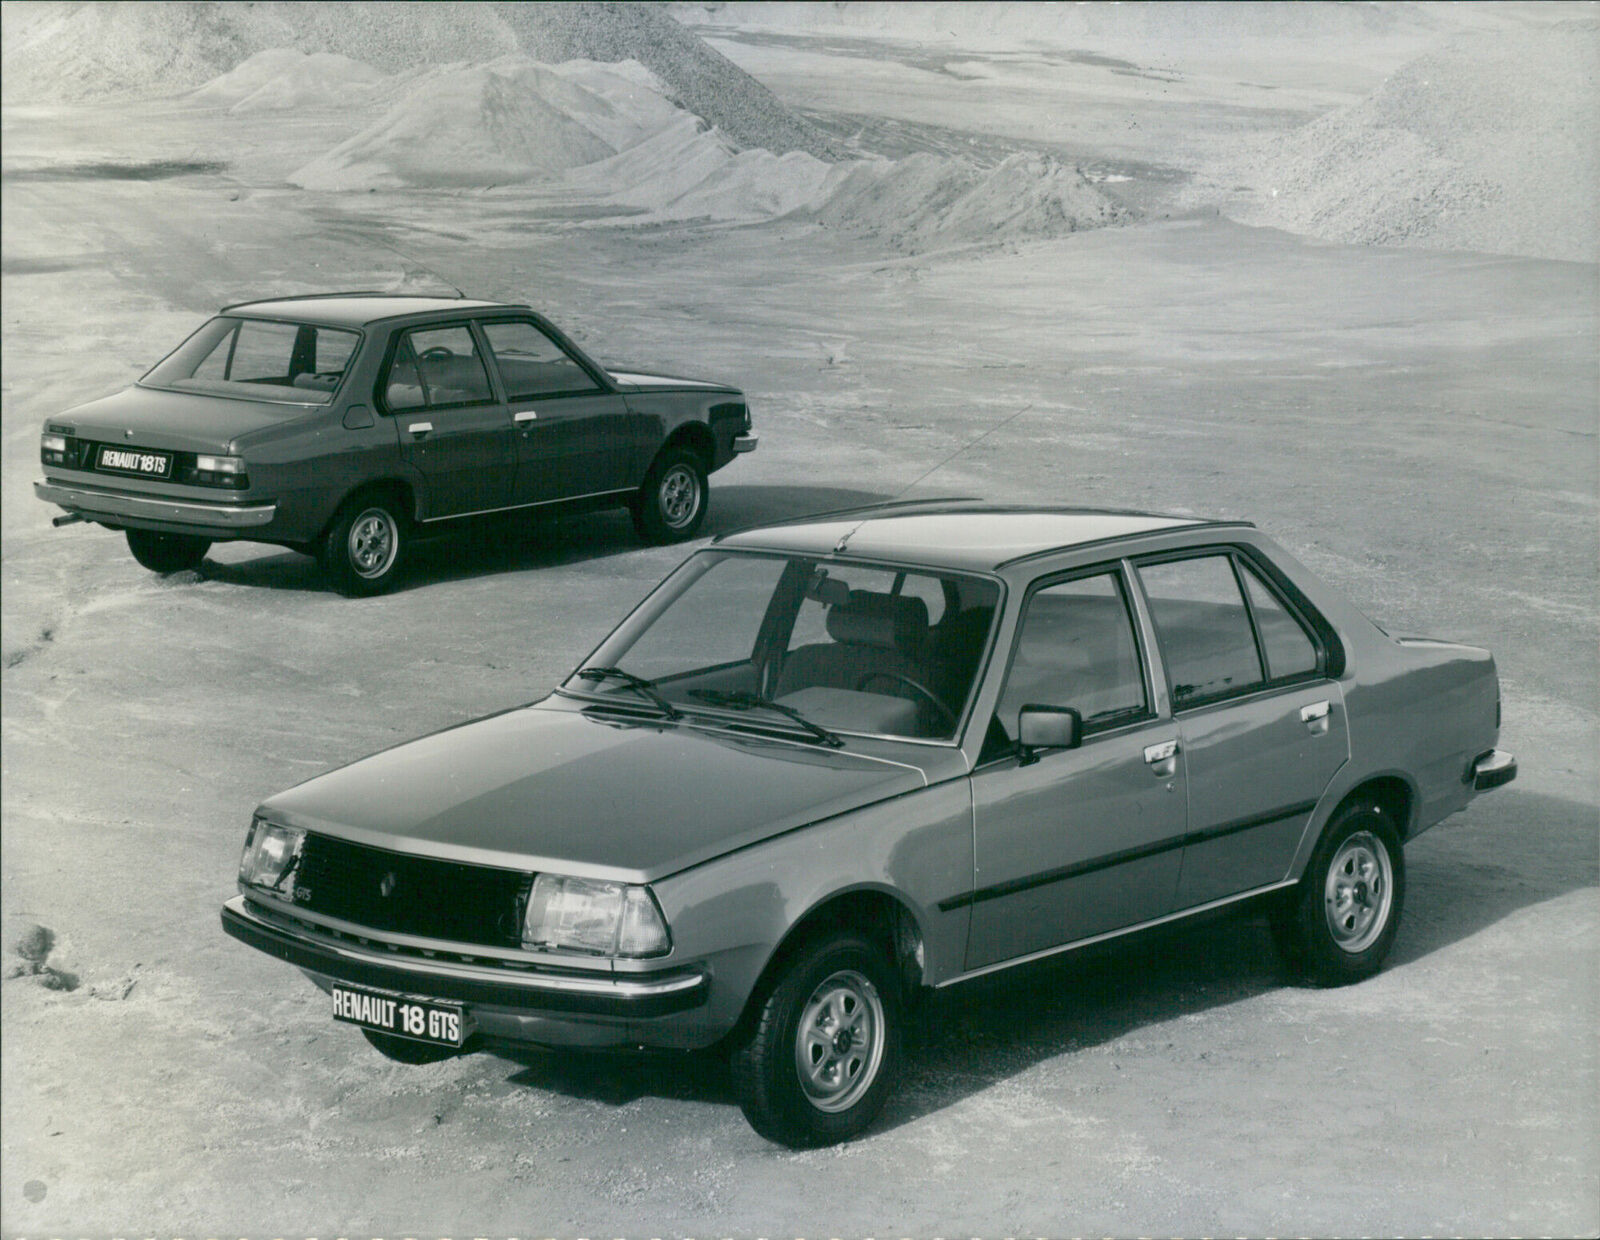 Two Renault 18 cars - Vintage Photograph 3176308